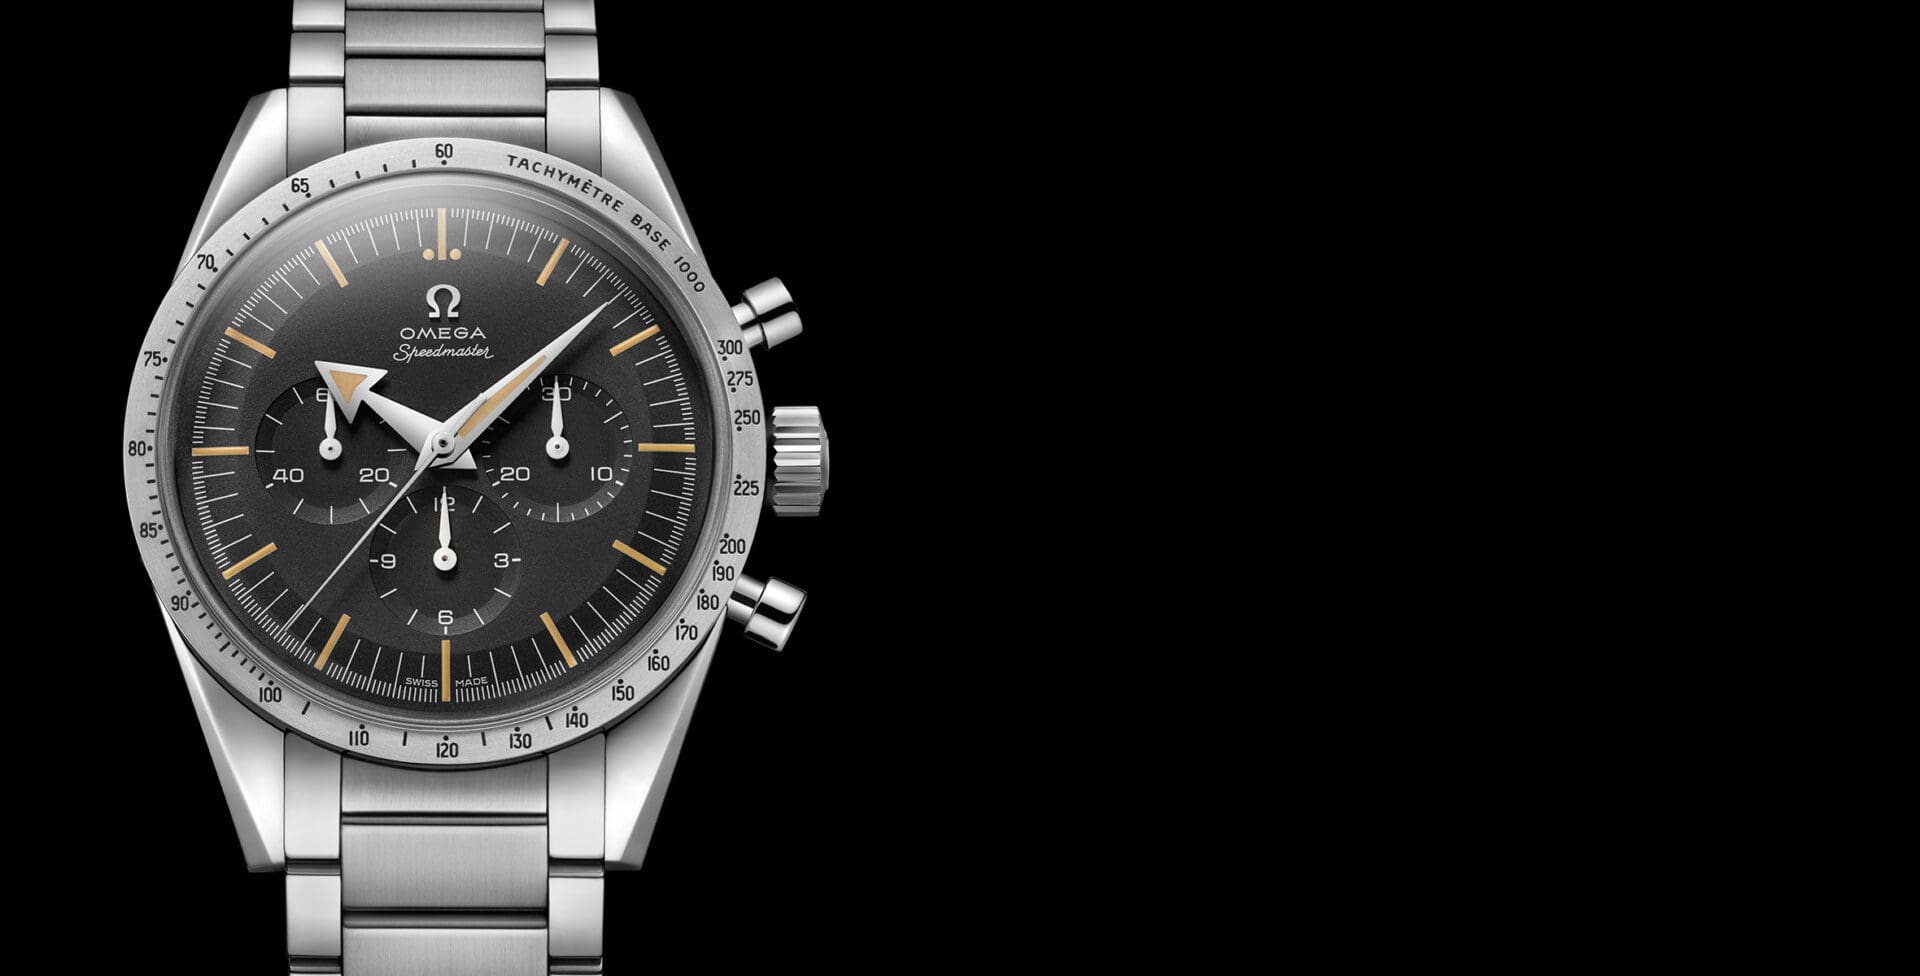 BREAKING: Video of Omega’s key releases, including an incredible Speedmaster, Railmaster, Seamaster box set